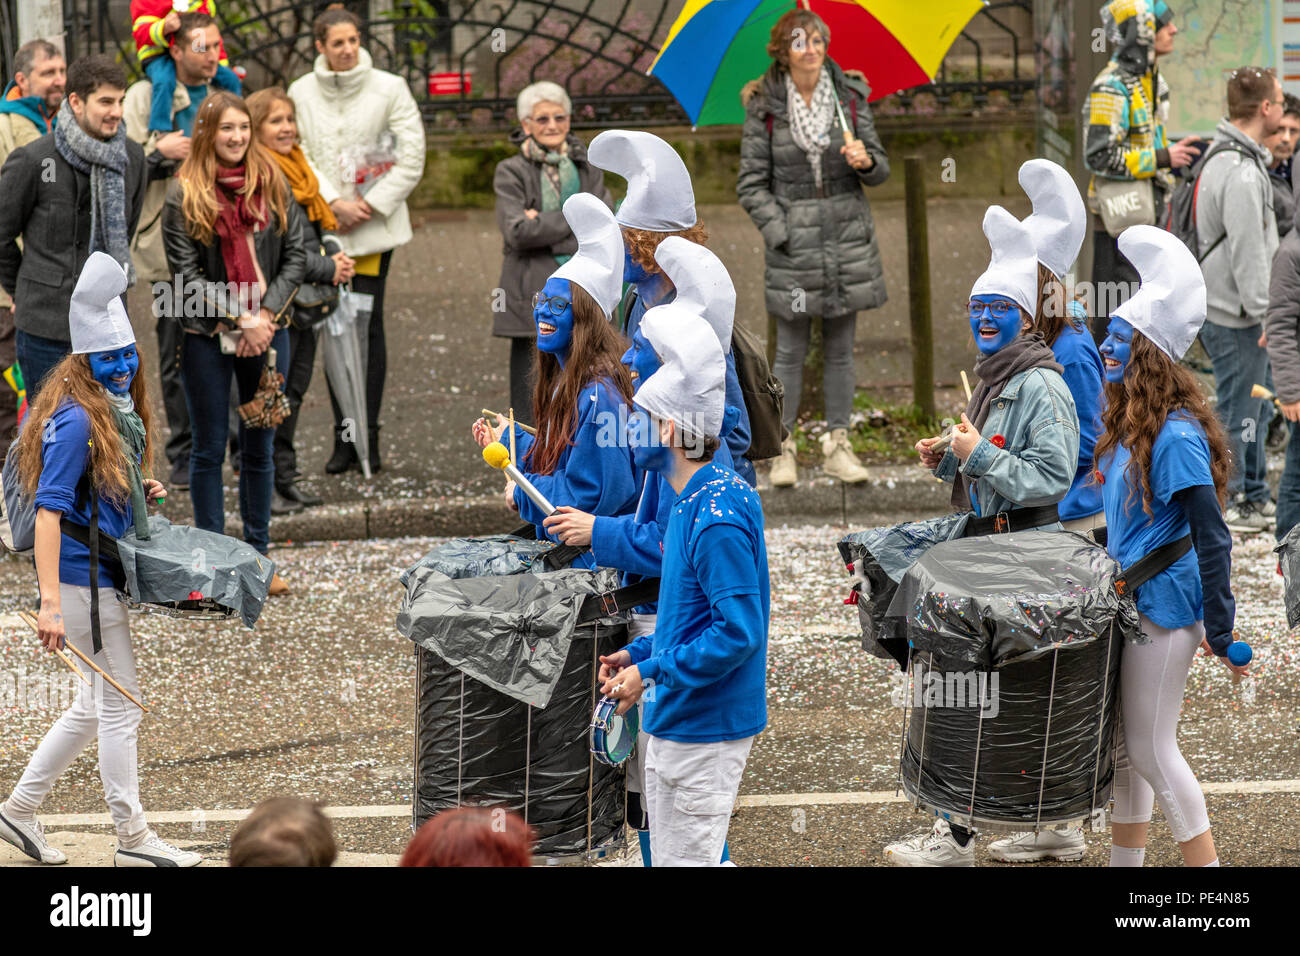 Musicians dressed as Smurfs with Phrygian caps, marching band, Strasbourg carnival parade, Alsace, France, Europe, Stock Photo